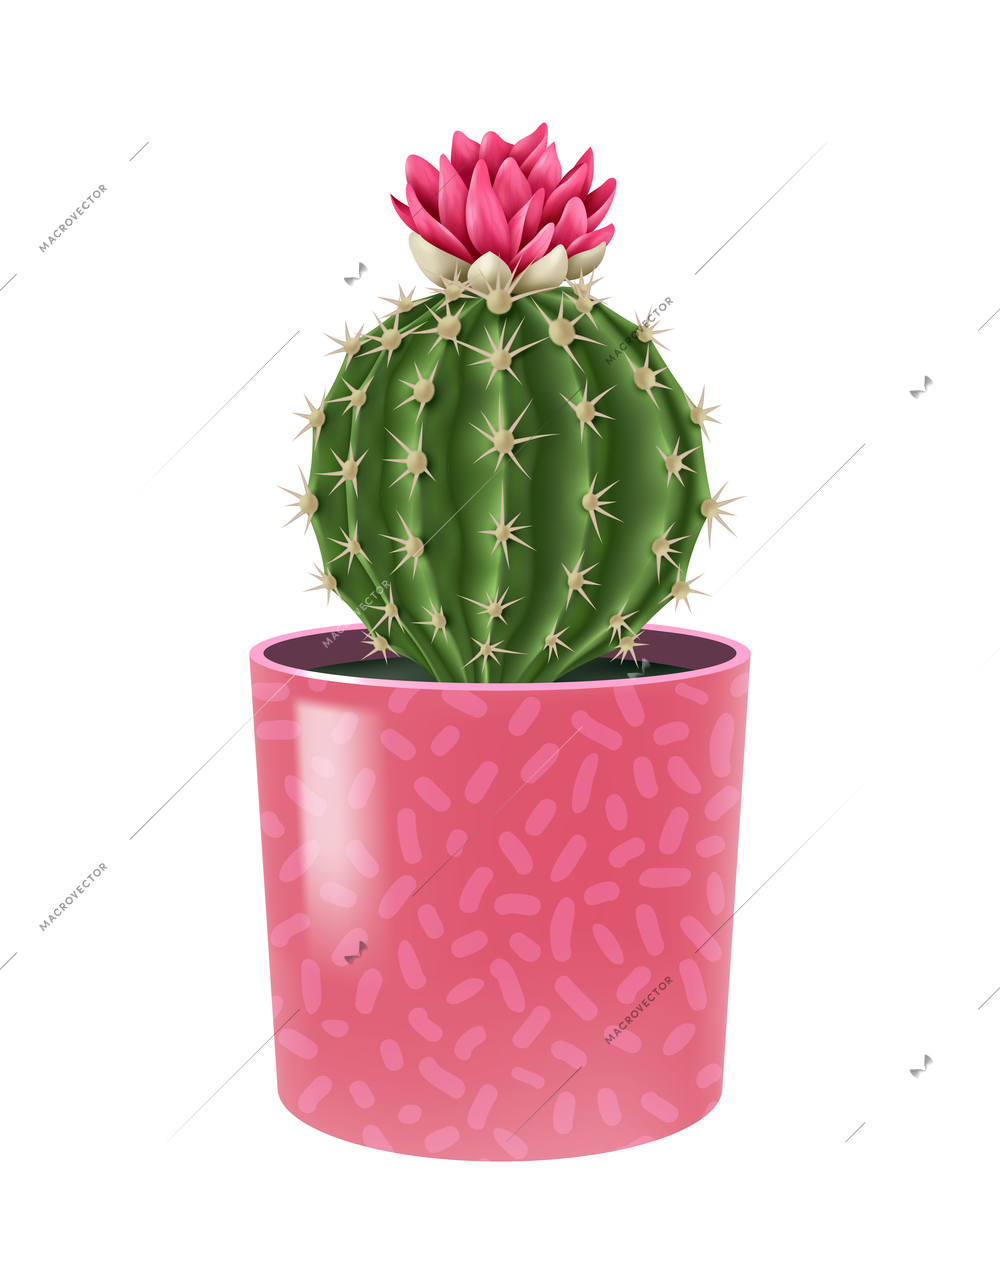 Blooming cacti realistic composition with cactus flower popular houseplant in colorful decorative pot vector illustration